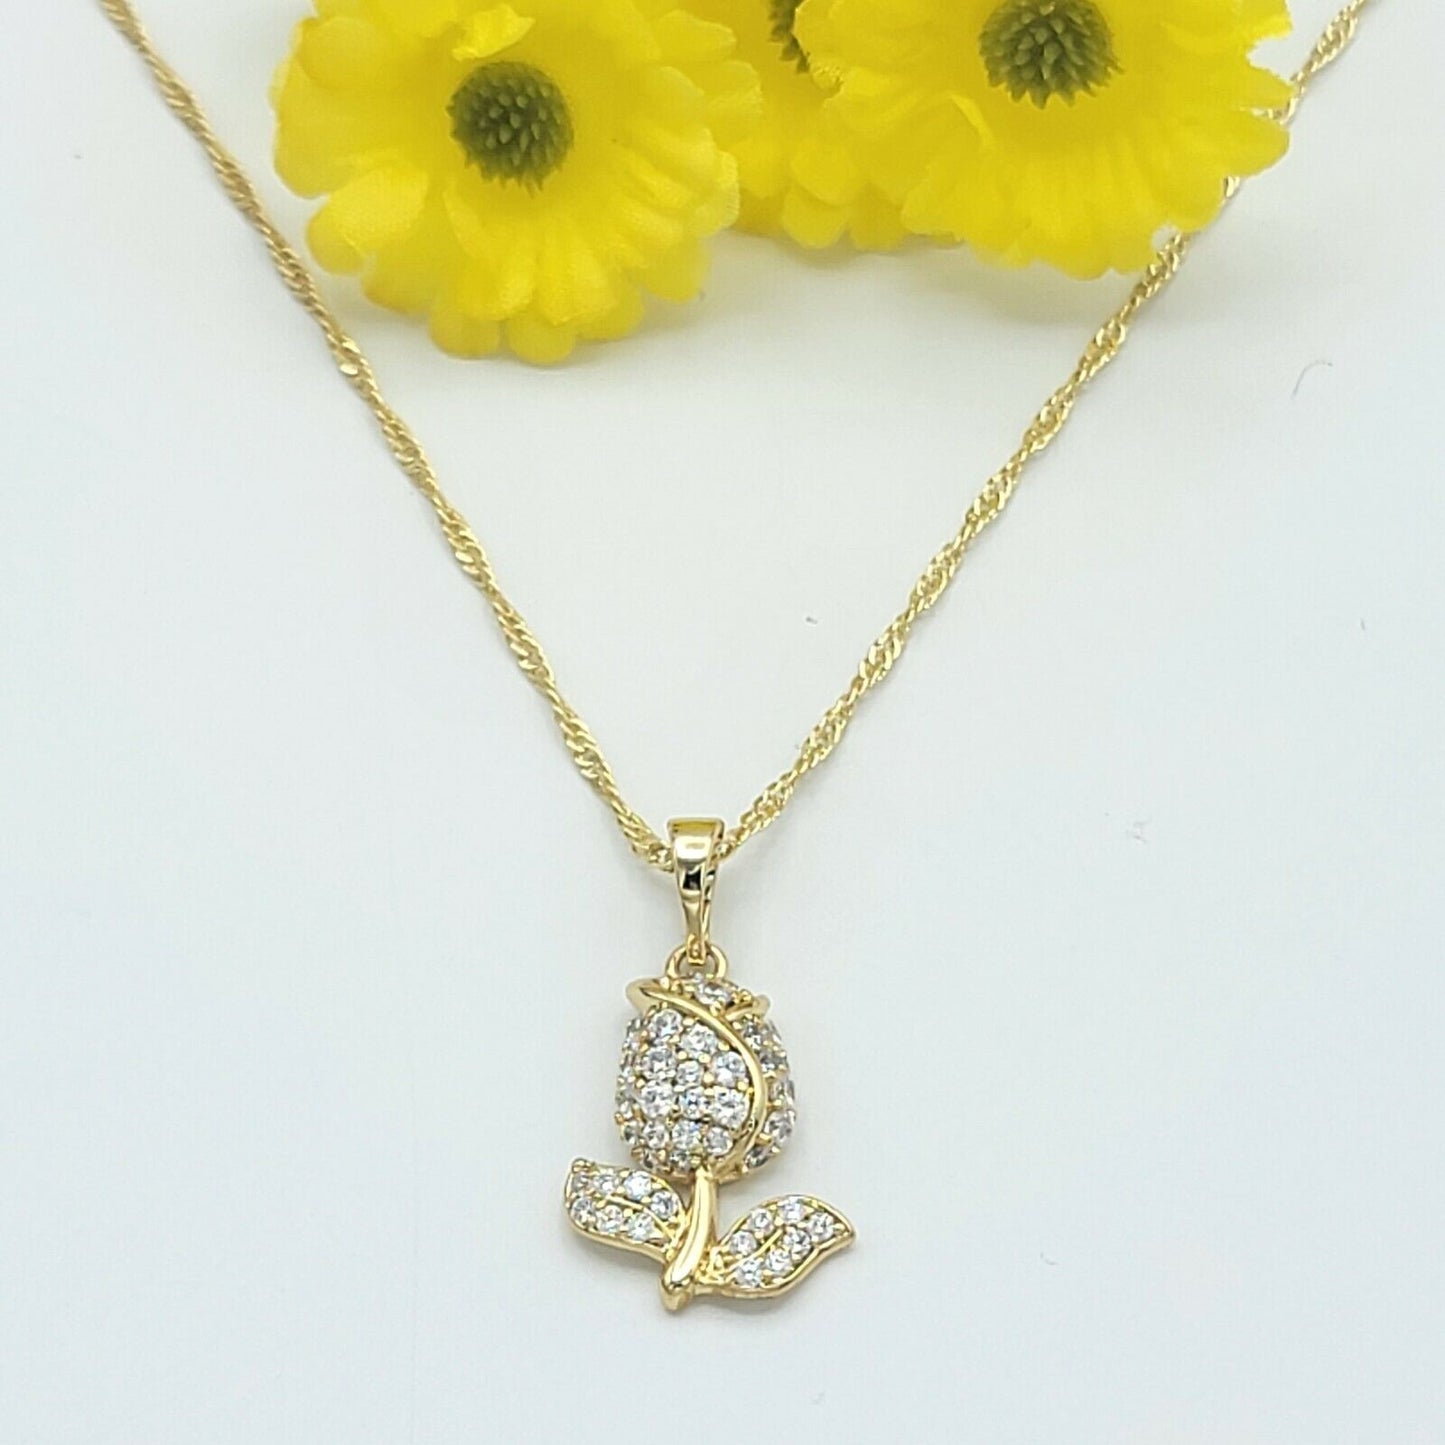 Necklaces - 14K Gold Plated. Icy Rose Flower Pendant & Chain.